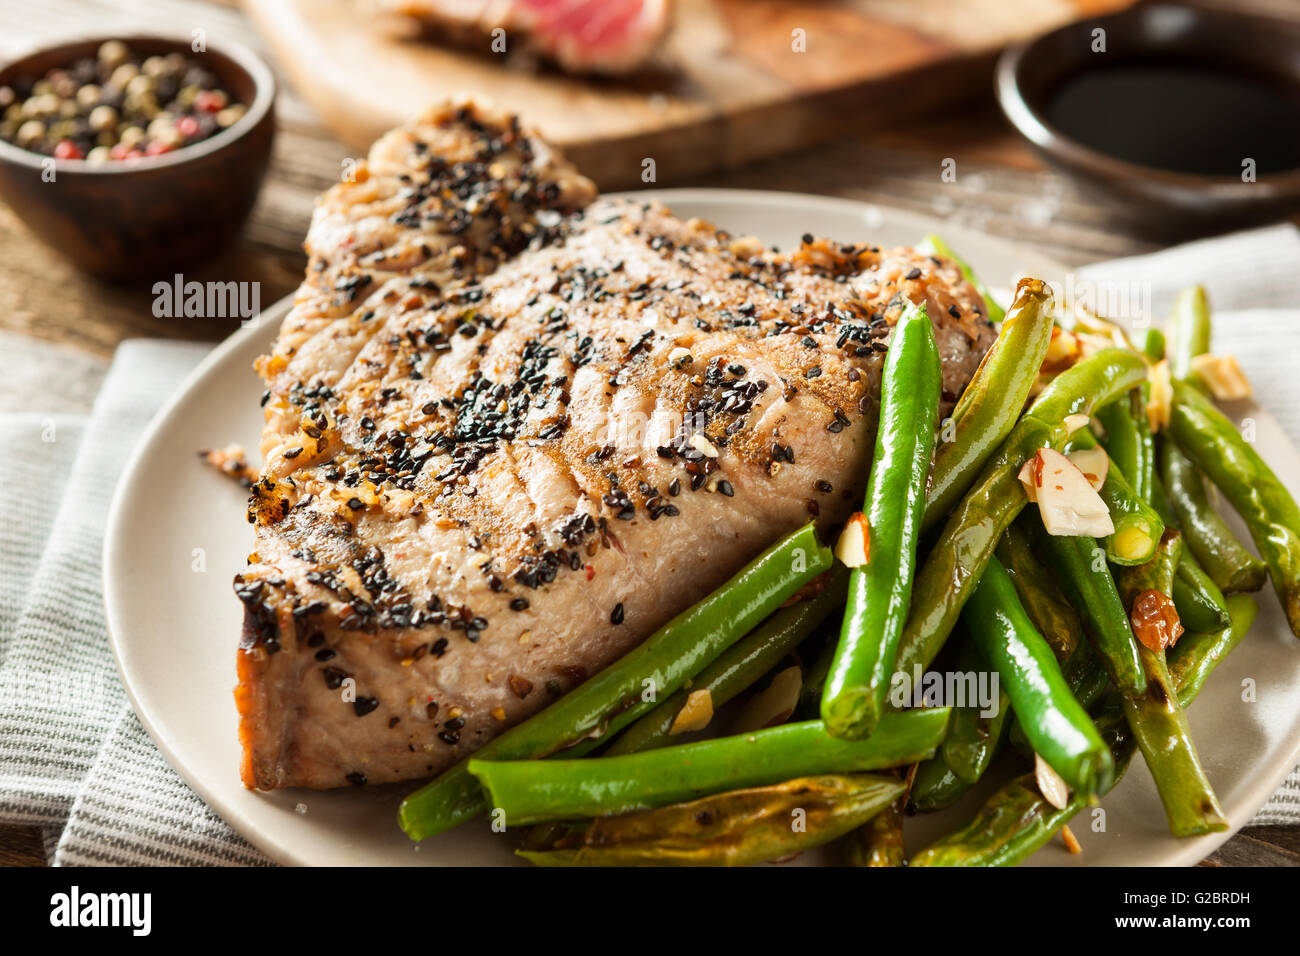 Homemade Grilled Sesame Tuna Steak with Soy Sauce Stock Photo